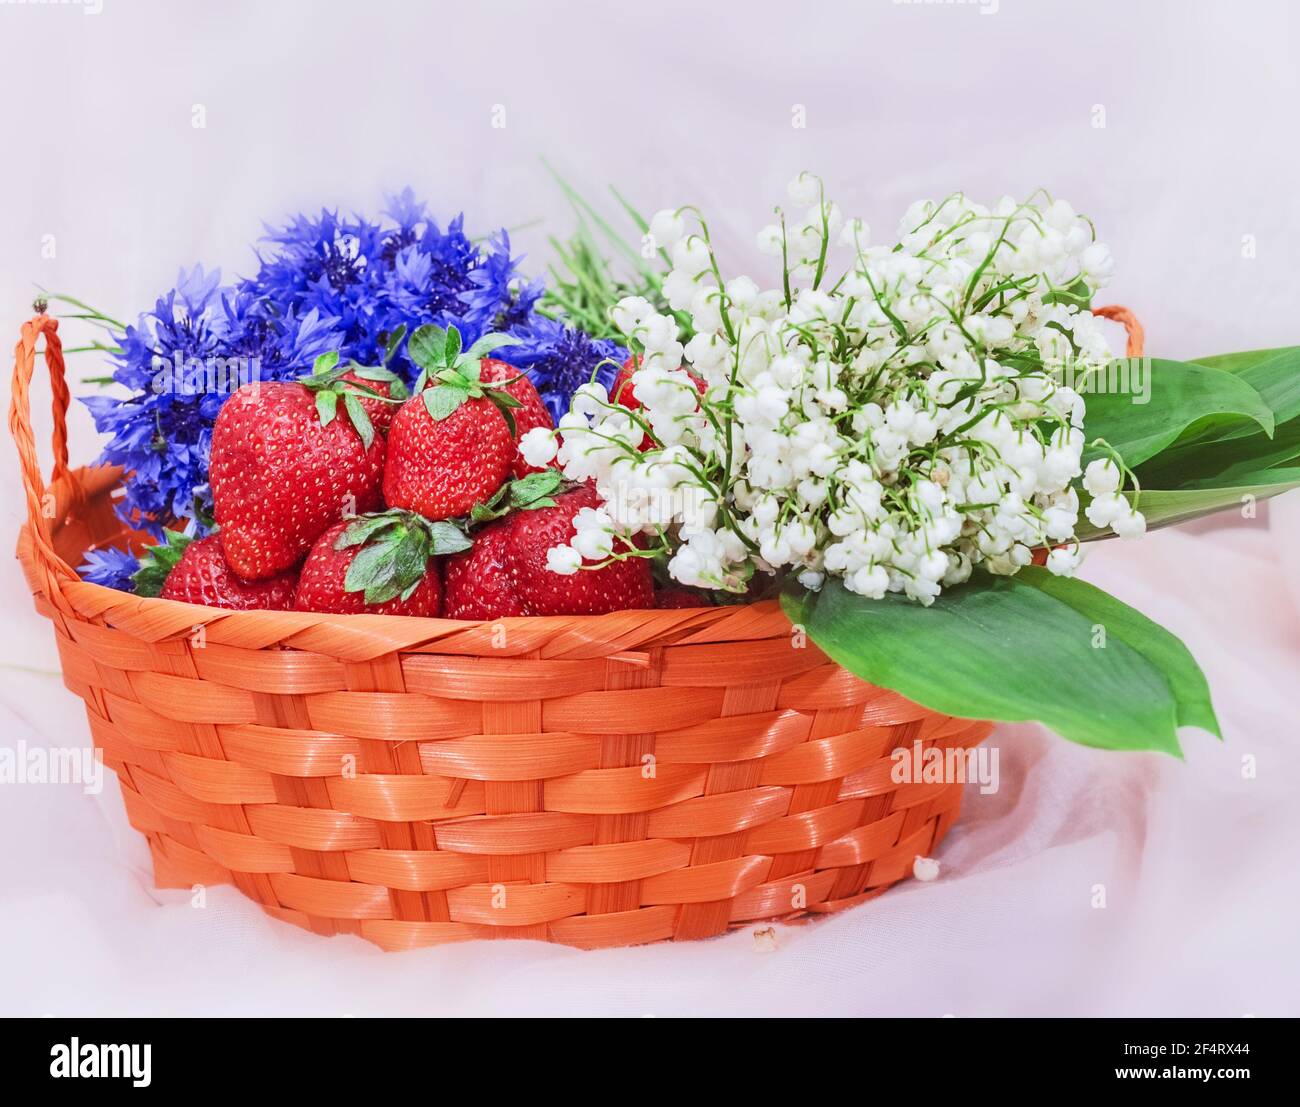 Pretty lilies of the valley, red fresh strawberries and cornflowers in orange basket Stock Photo